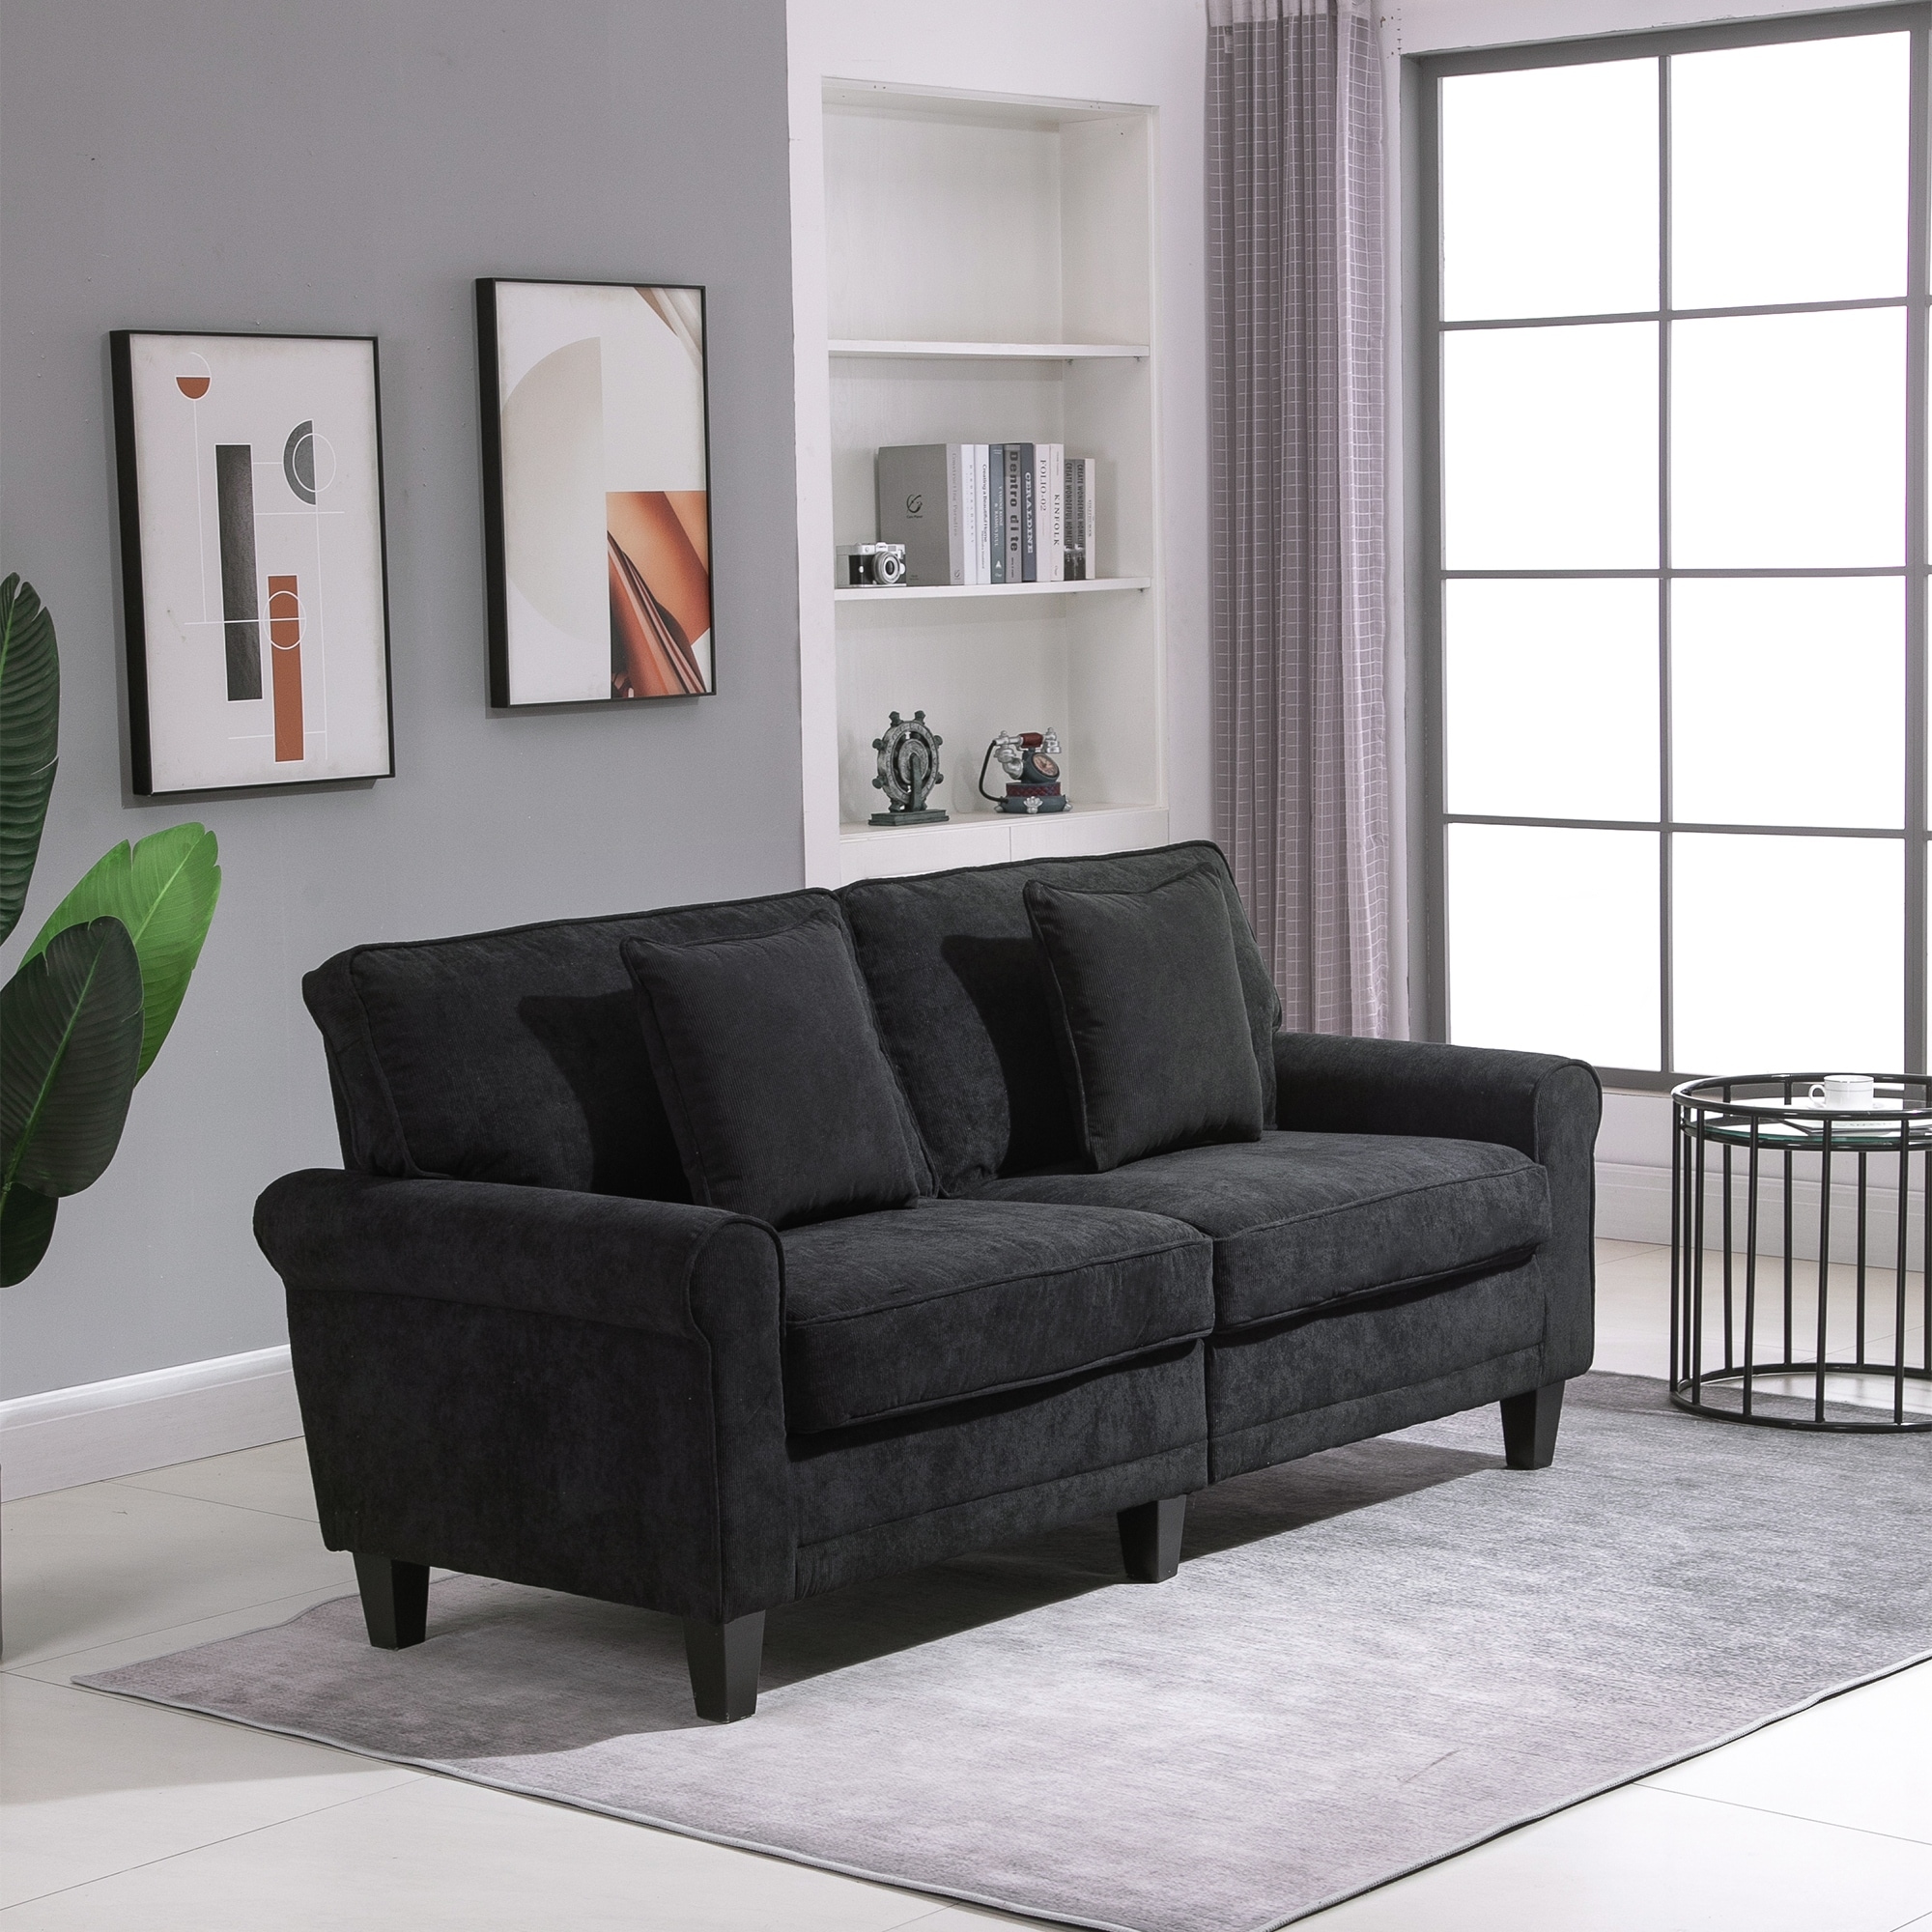 https://ak1.ostkcdn.com/images/products/is/images/direct/4f414ac2a5de40046eb06092c1122248c2131edd/HOMCOM-Modern-Classic-3-Seater-Sofa-Corduroy-Fabric-Couch-with-Pine-Wood-Legs%2C-Rolled-Arms-for-Living-Room%2C-Black.jpg